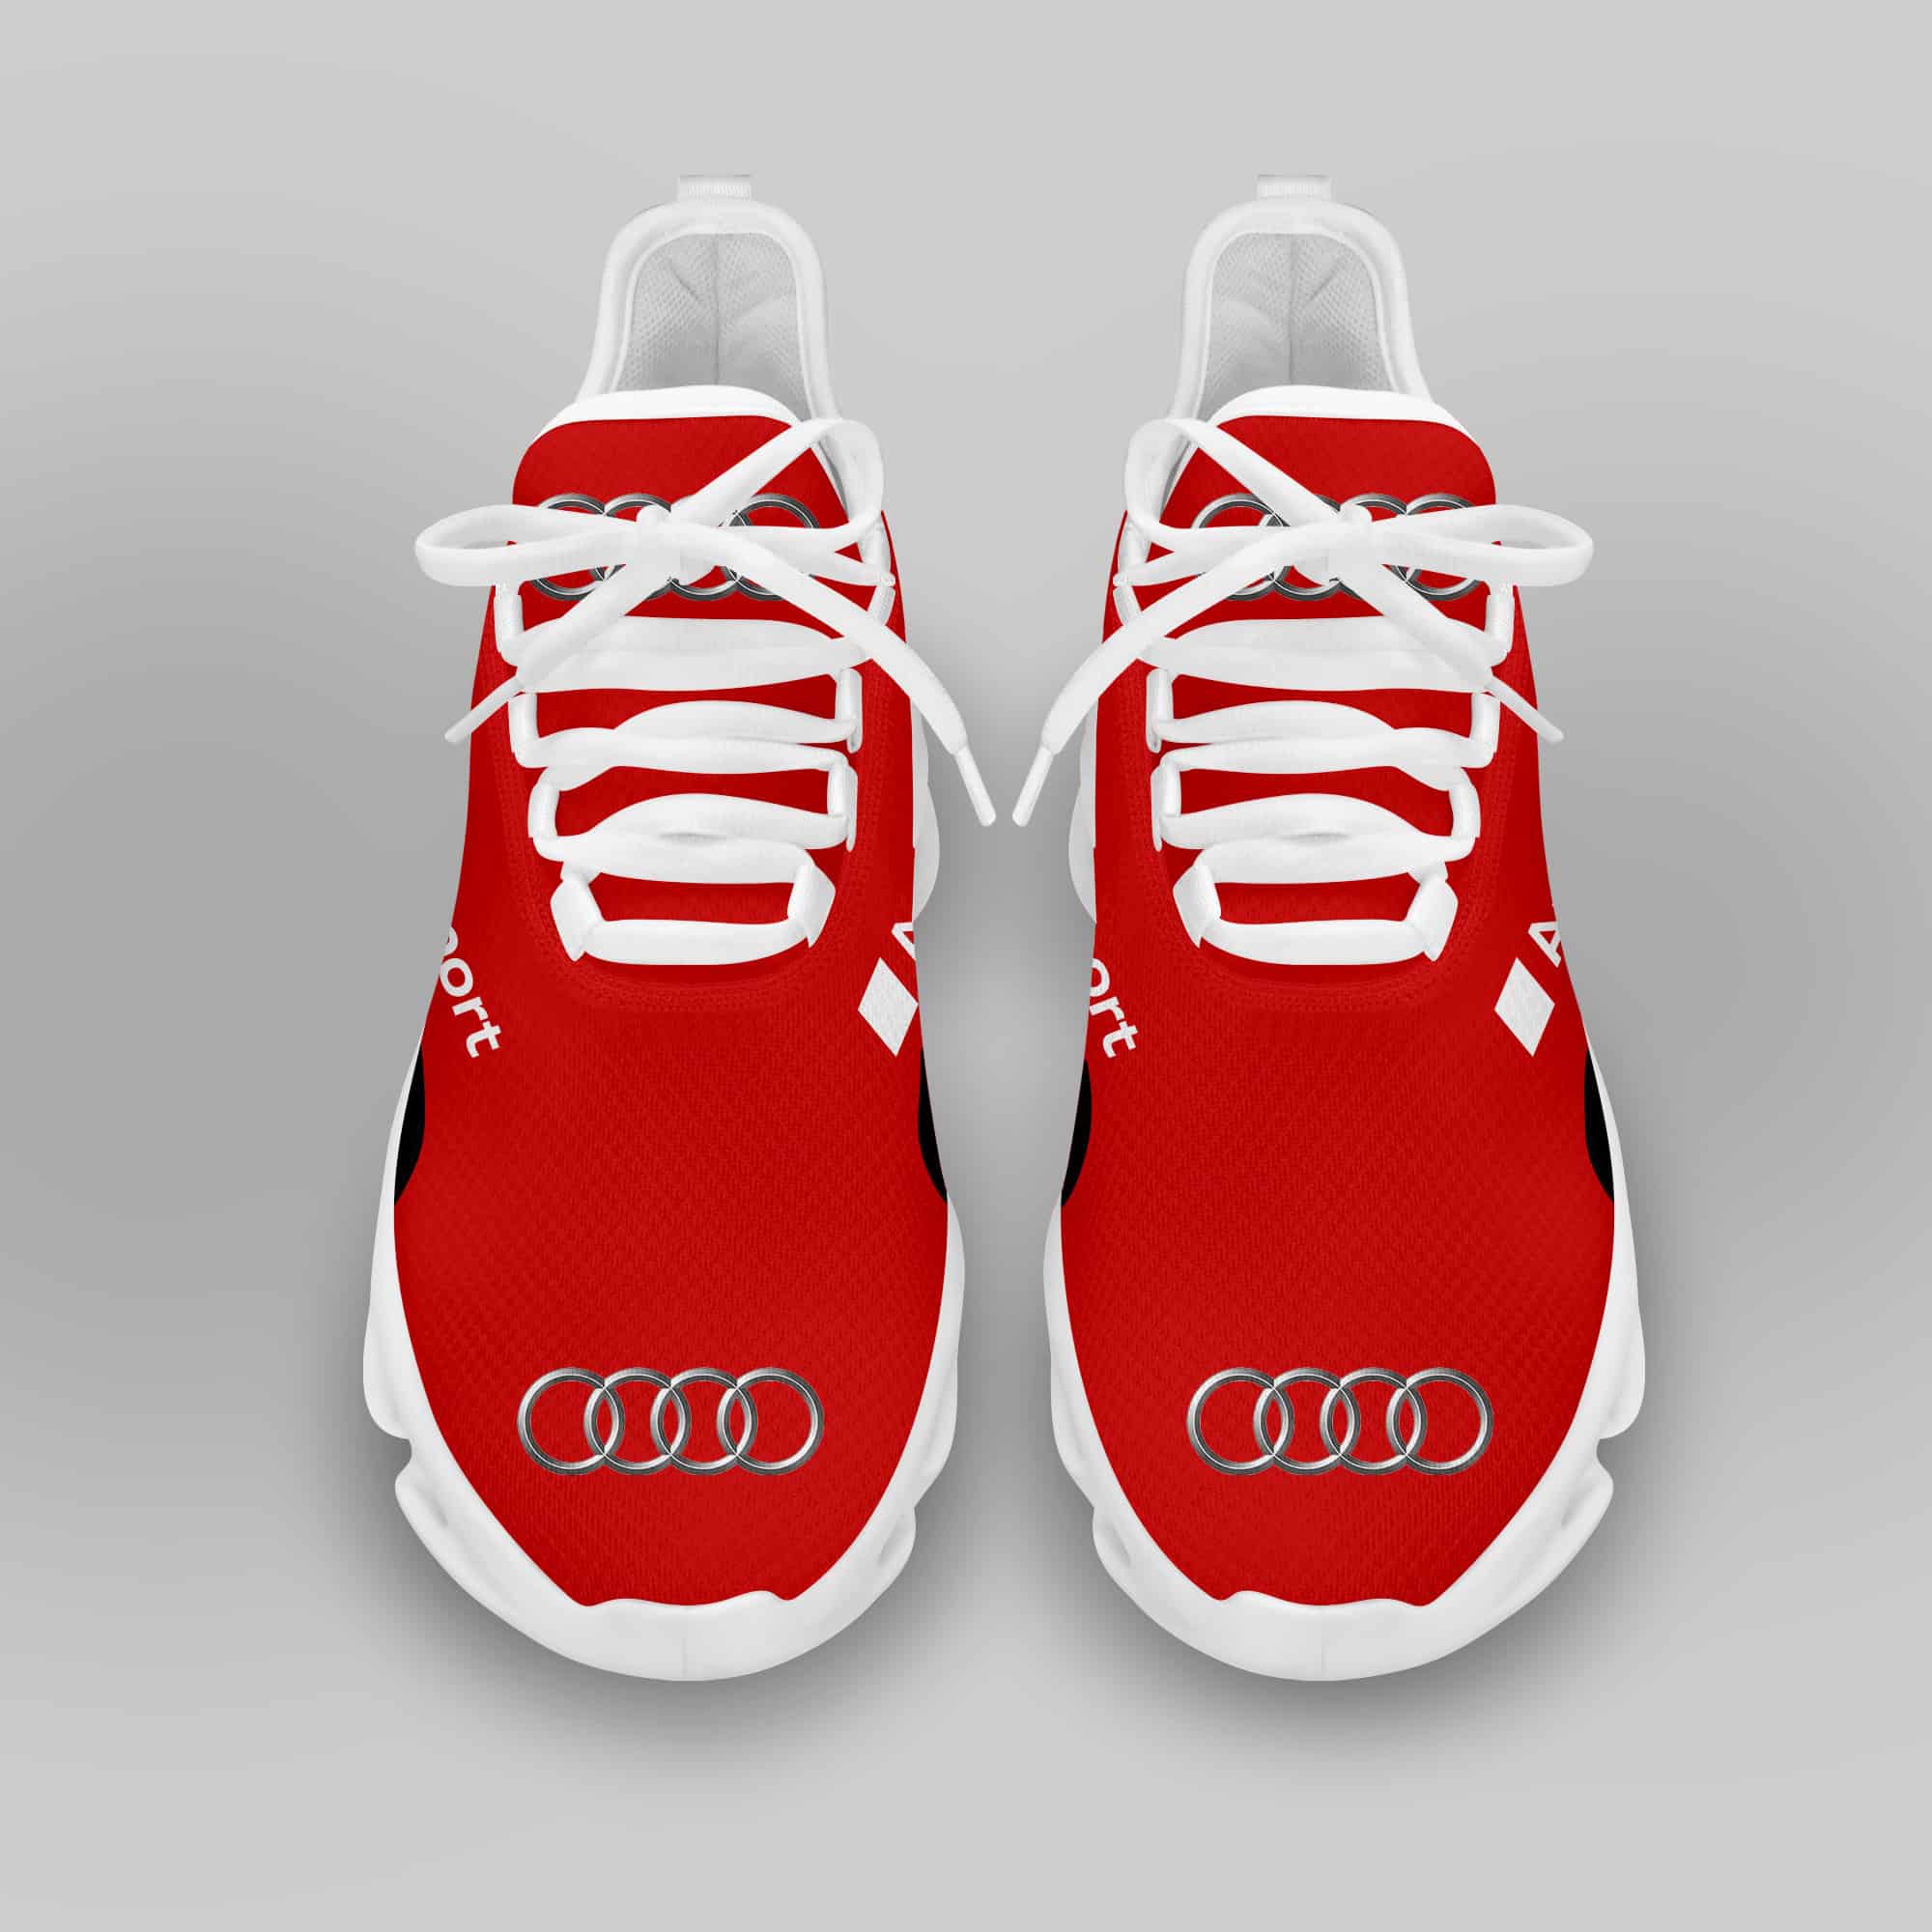 Audi Sport Running Shoes Max Soul Shoes Sneakers Ver 30 3